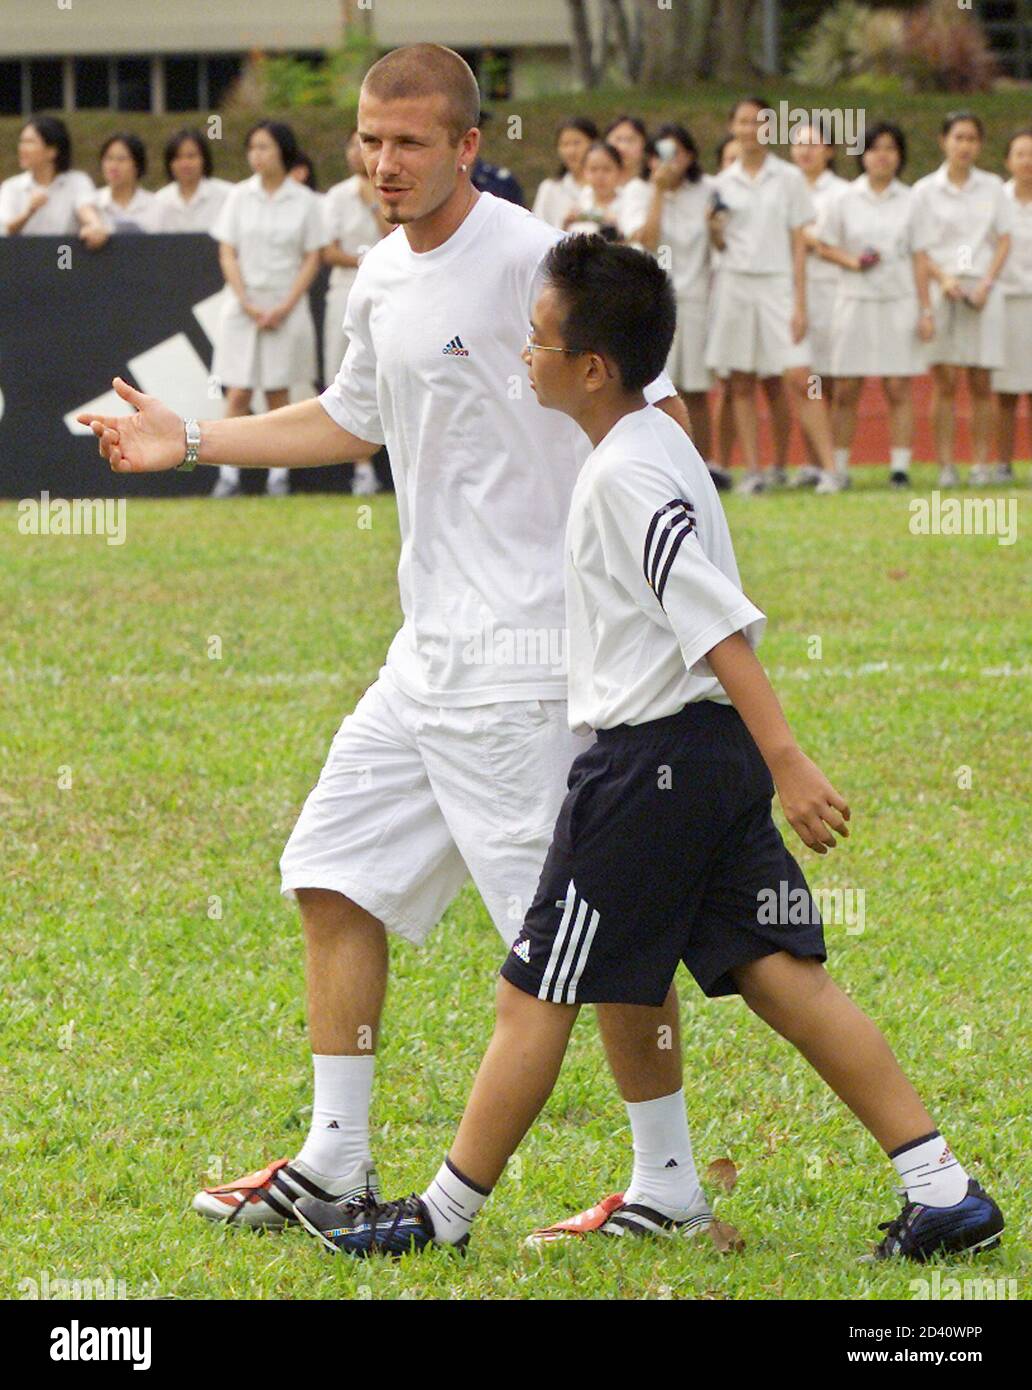 Manchester United star David Beckham gives a pointer to a youth during a  short soccer match at a clinic in Singapore July 26, 2001. Beckham is  touring through Southeast Asia with his